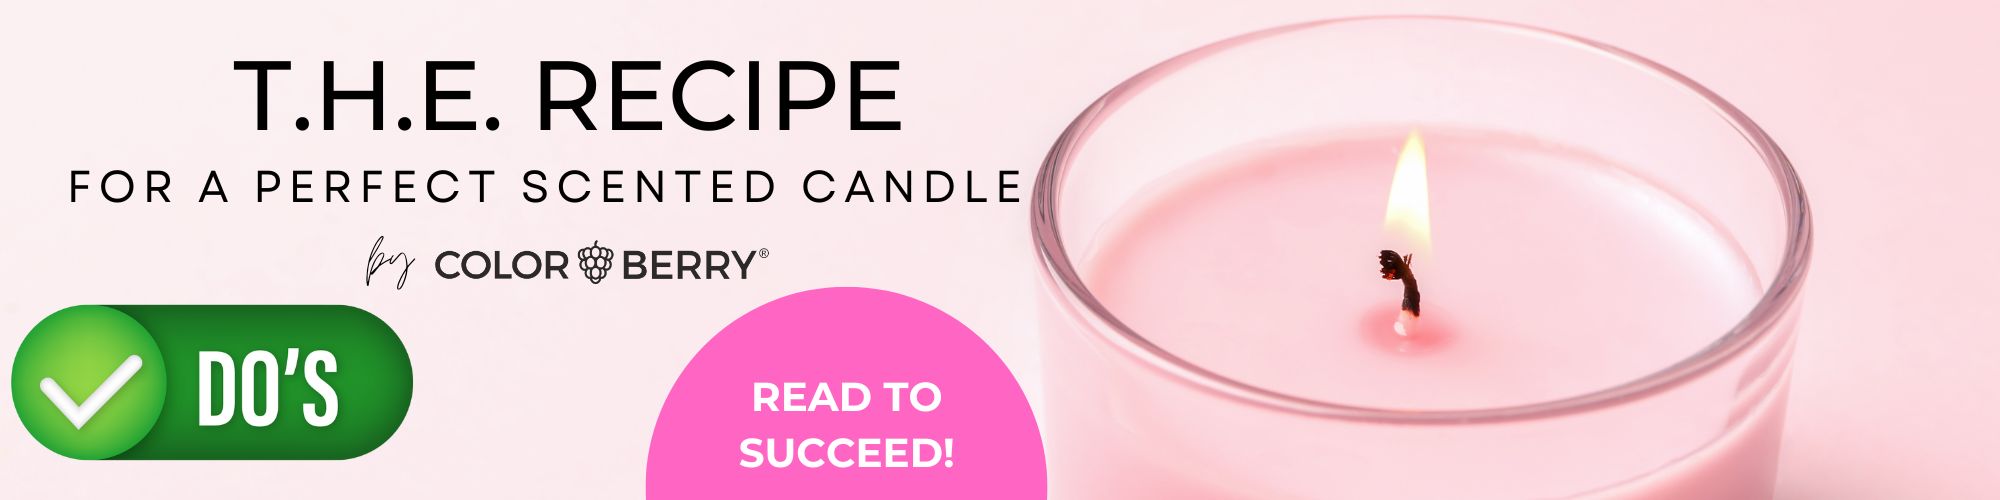 THE recipe to success for DIY scented candles !